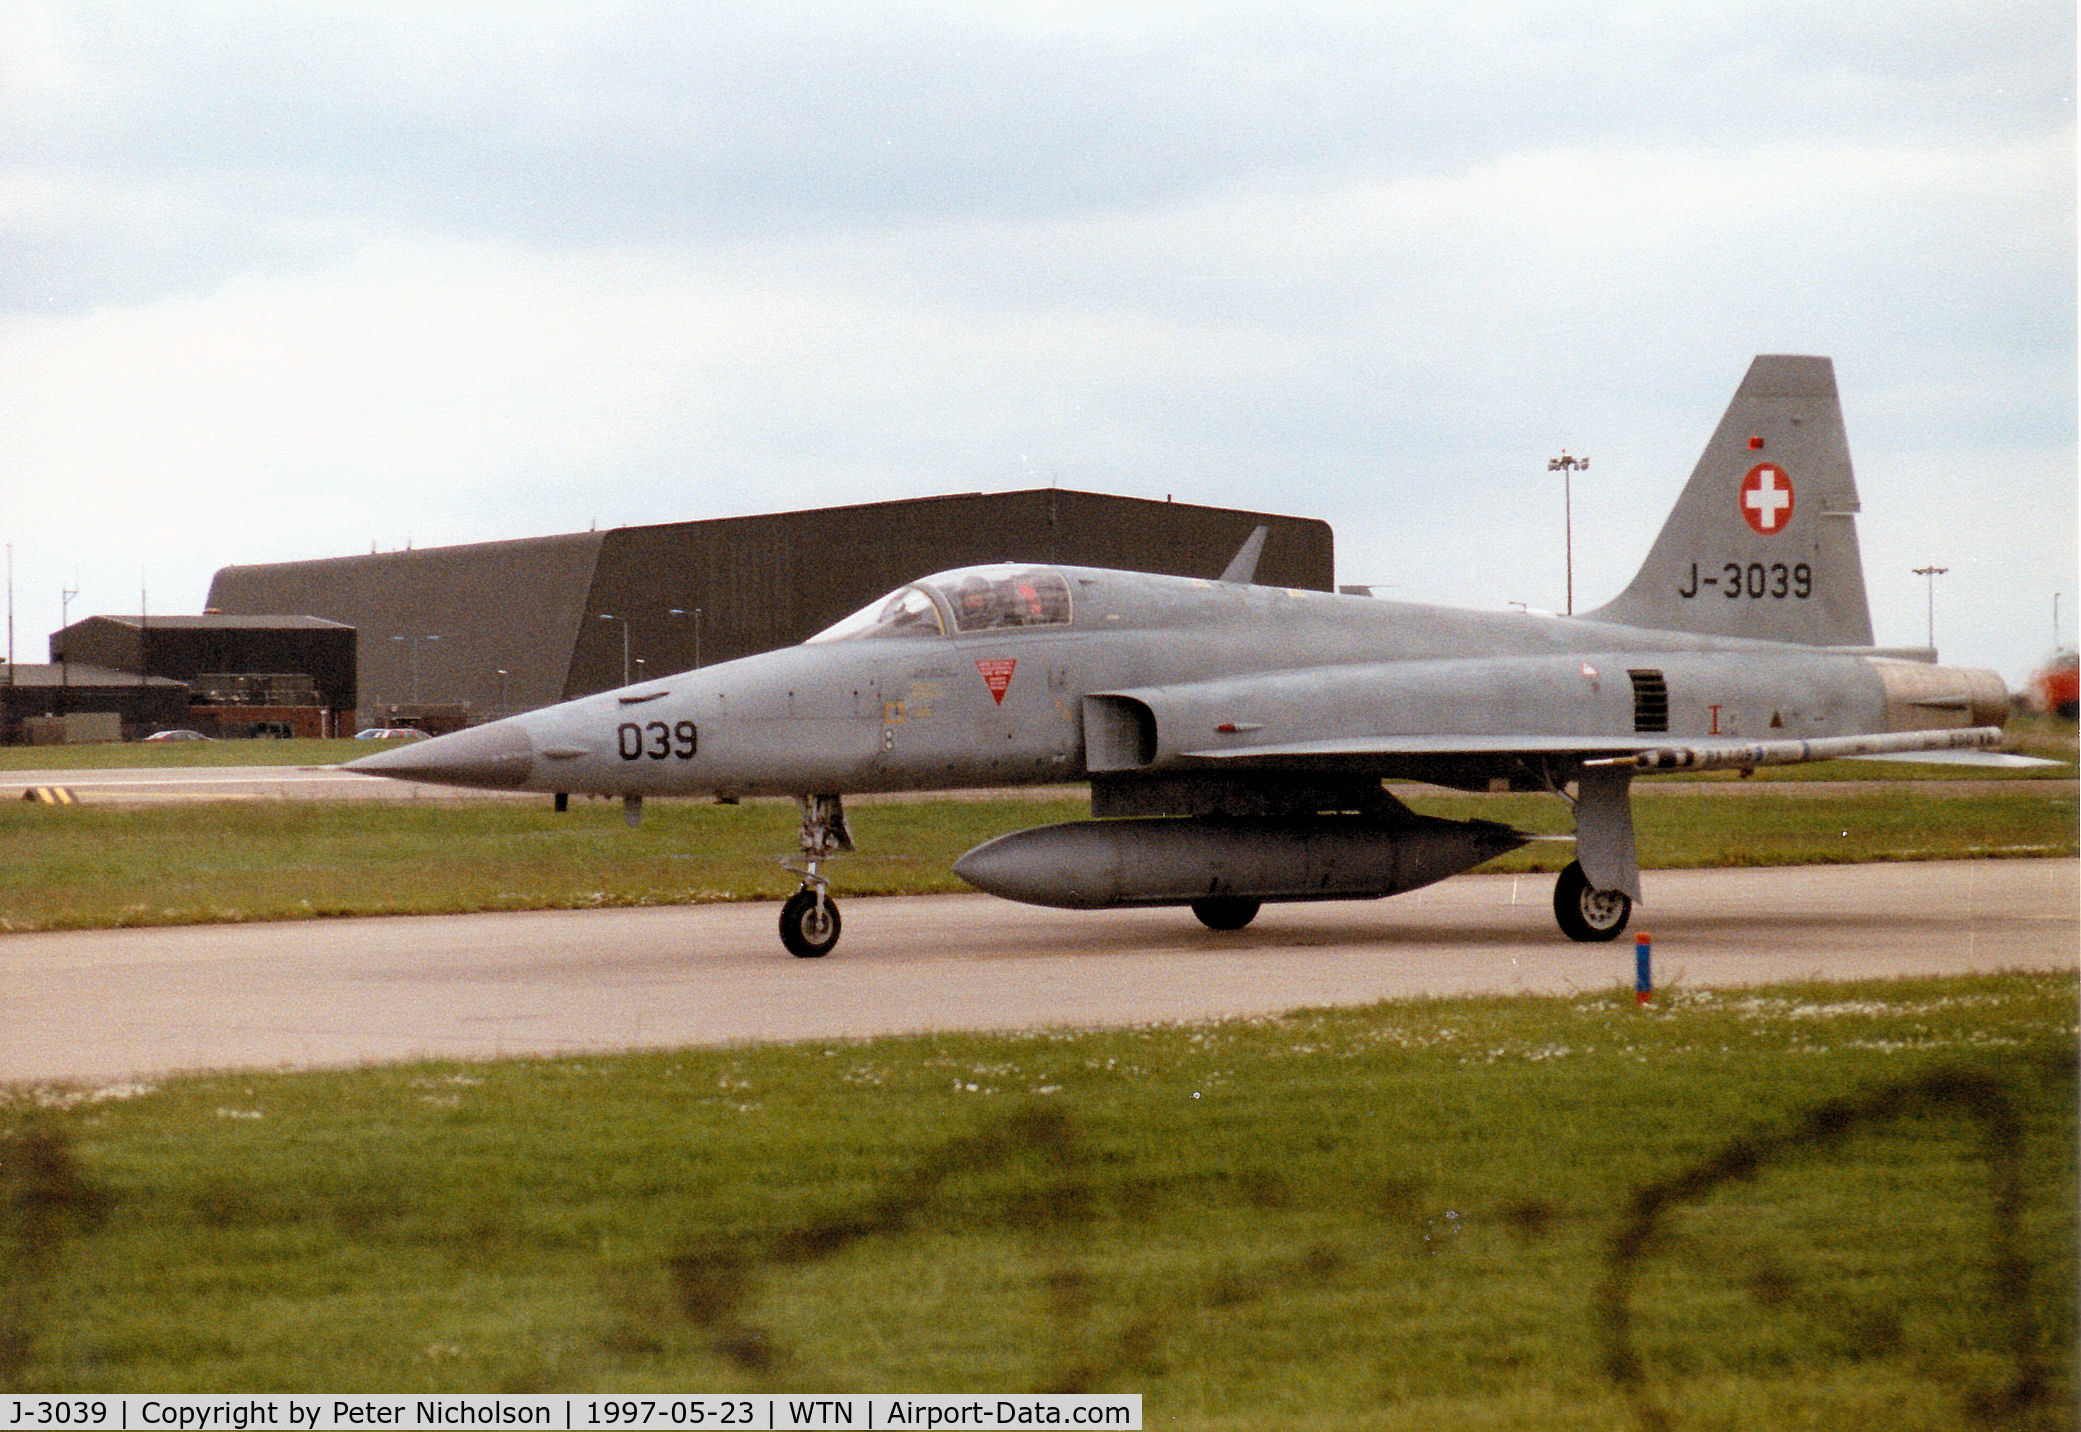 J-3039, 1976 Northrop F-5N Tiger II C/N L.1039, F-5E Tiger II of the Swiss Air Force taxying to dispersal at RAF Waddington in May 1997.